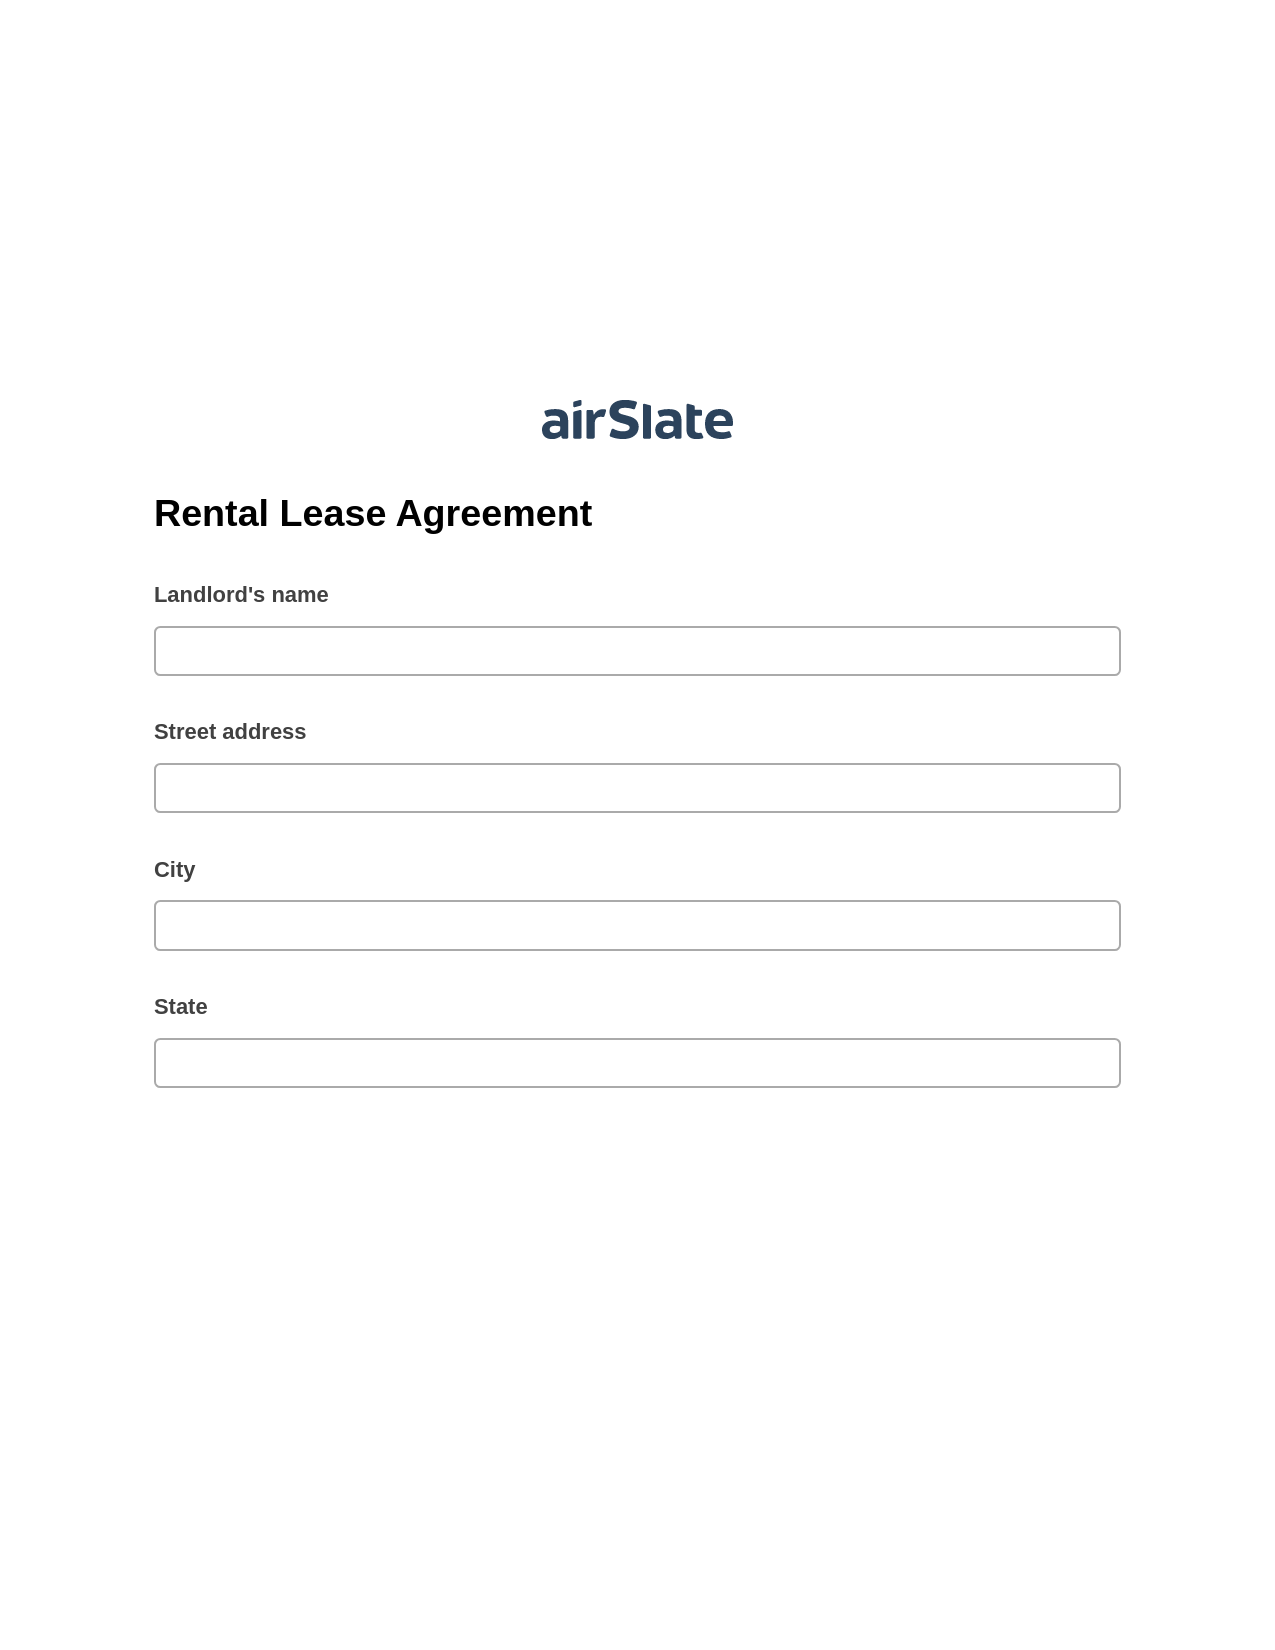 Rental Lease Agreement Pre-fill from Excel Spreadsheet Dropdown Options Bot, Jira Bot, Export to Google Sheet Bot